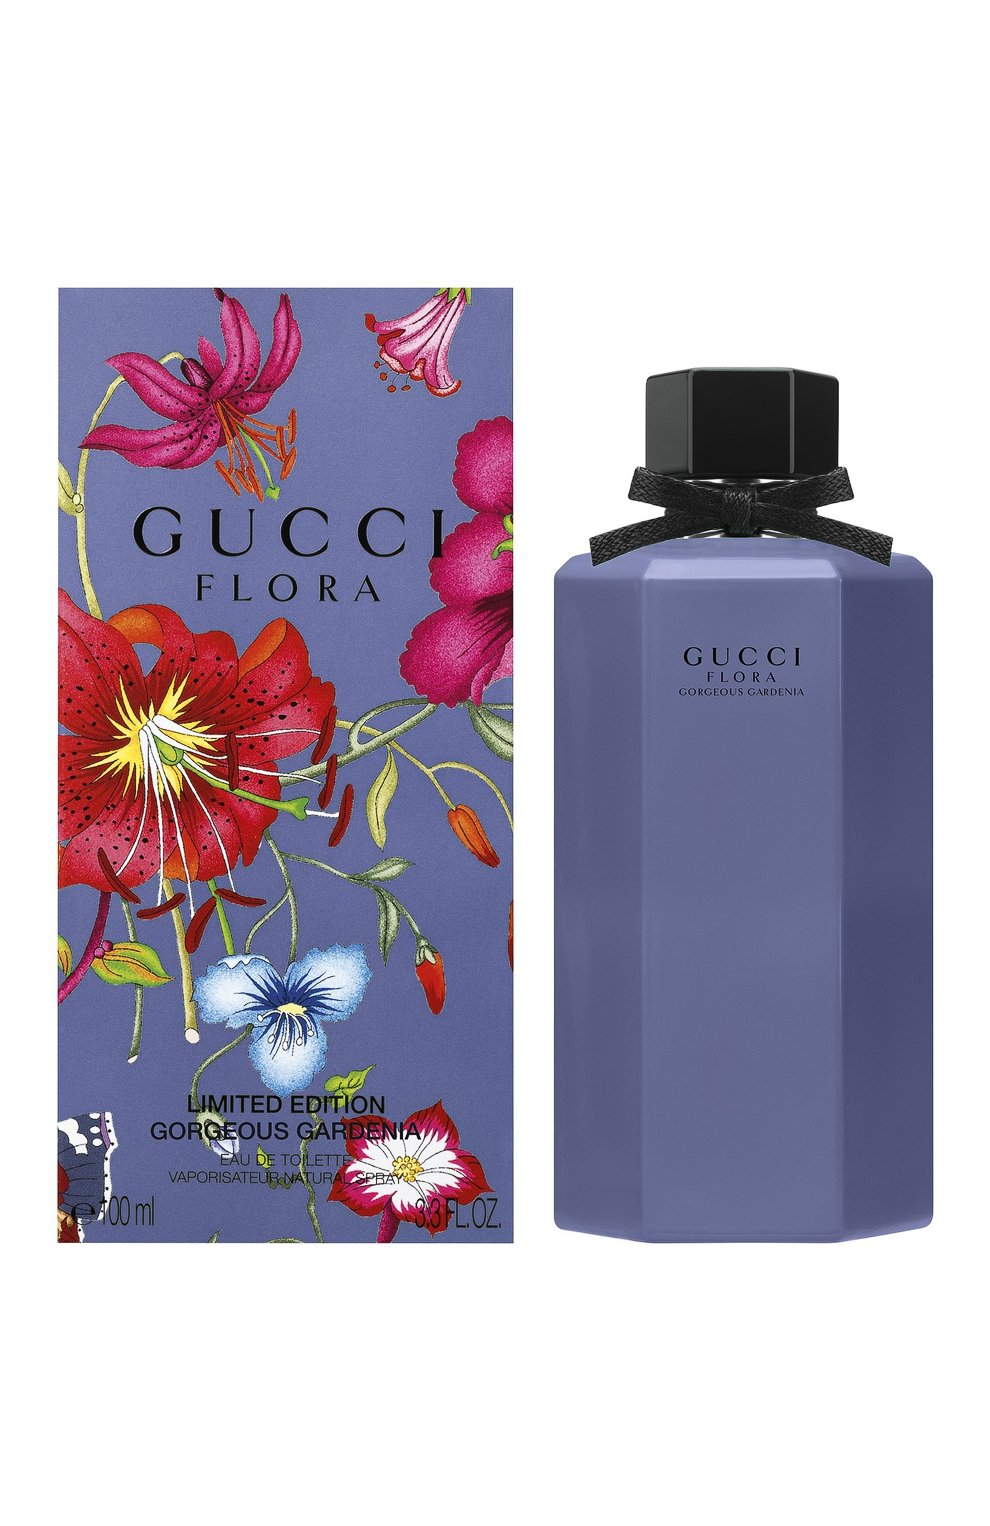 Gucci Flora by Gucci Gorgeous Gardenia Limited Edition 2020, edt 50ml